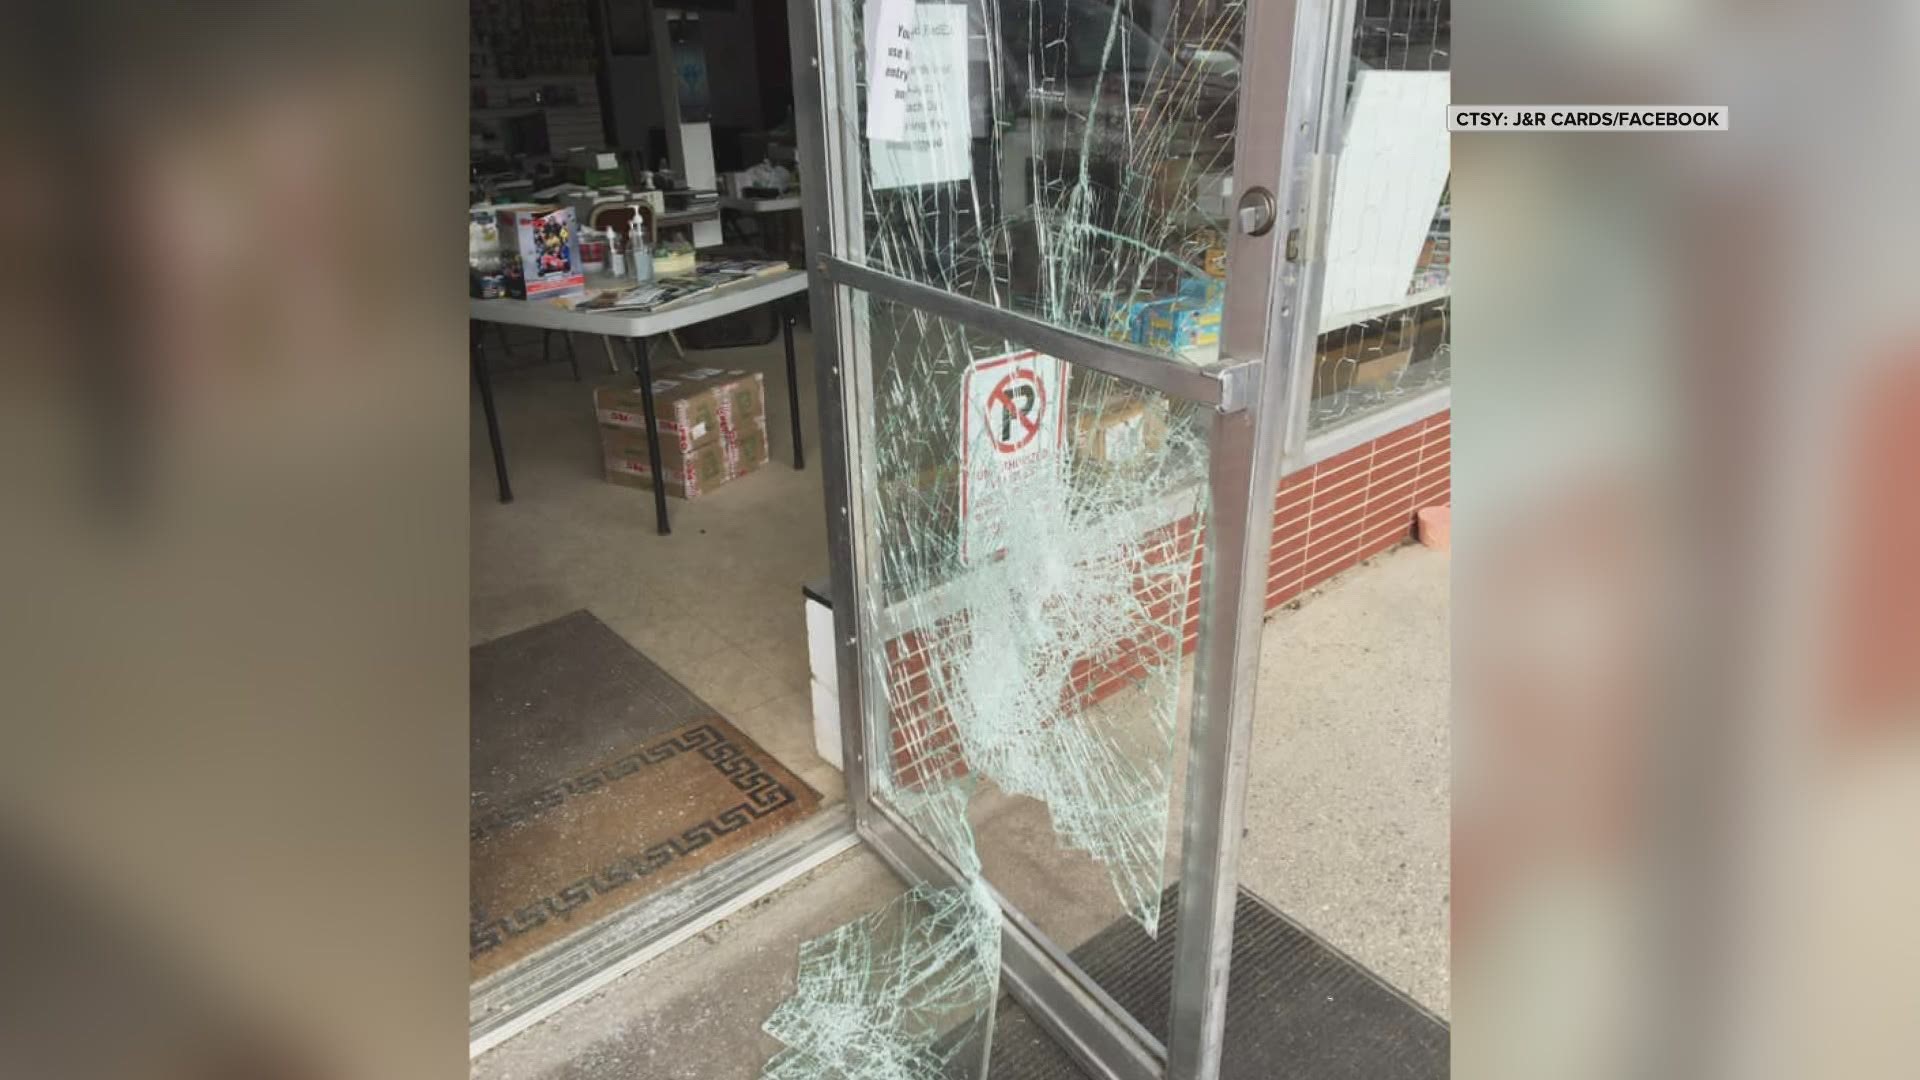 Police responded to a call from a driver reporting the glass front door of the store on cushing street had been shattered.